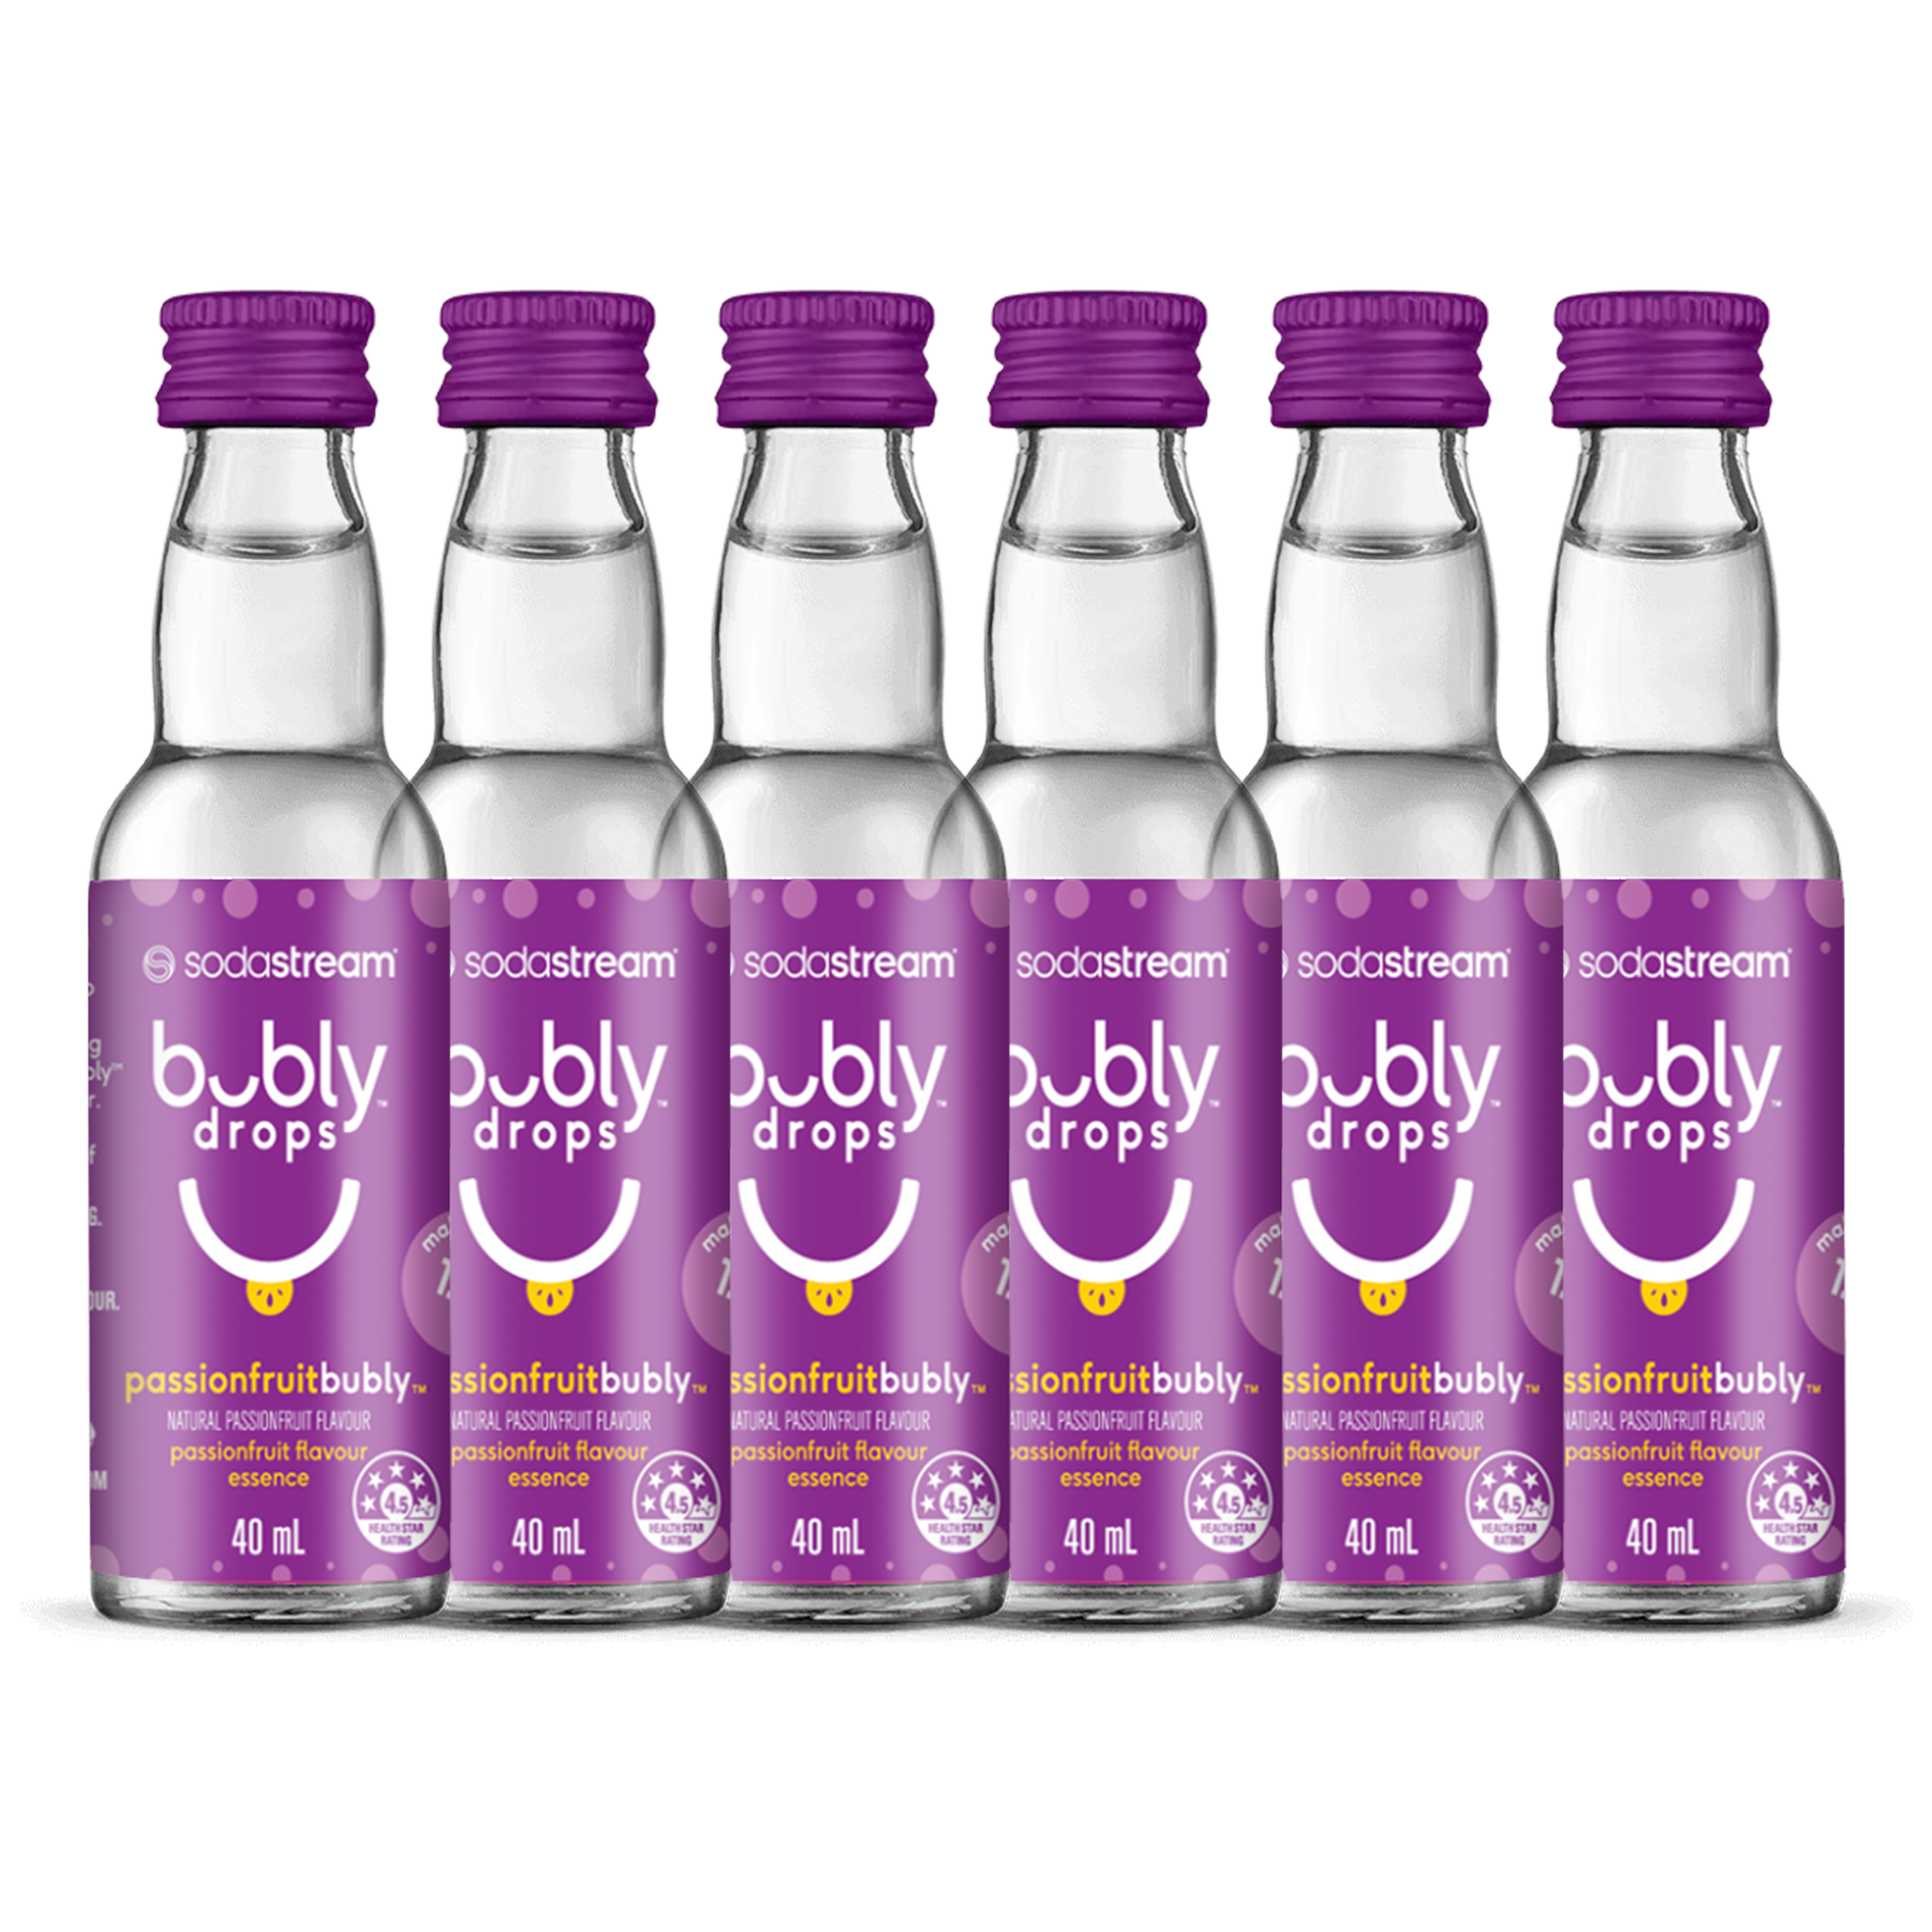 passionfruit bubly drops™ 6 Pack sodastream